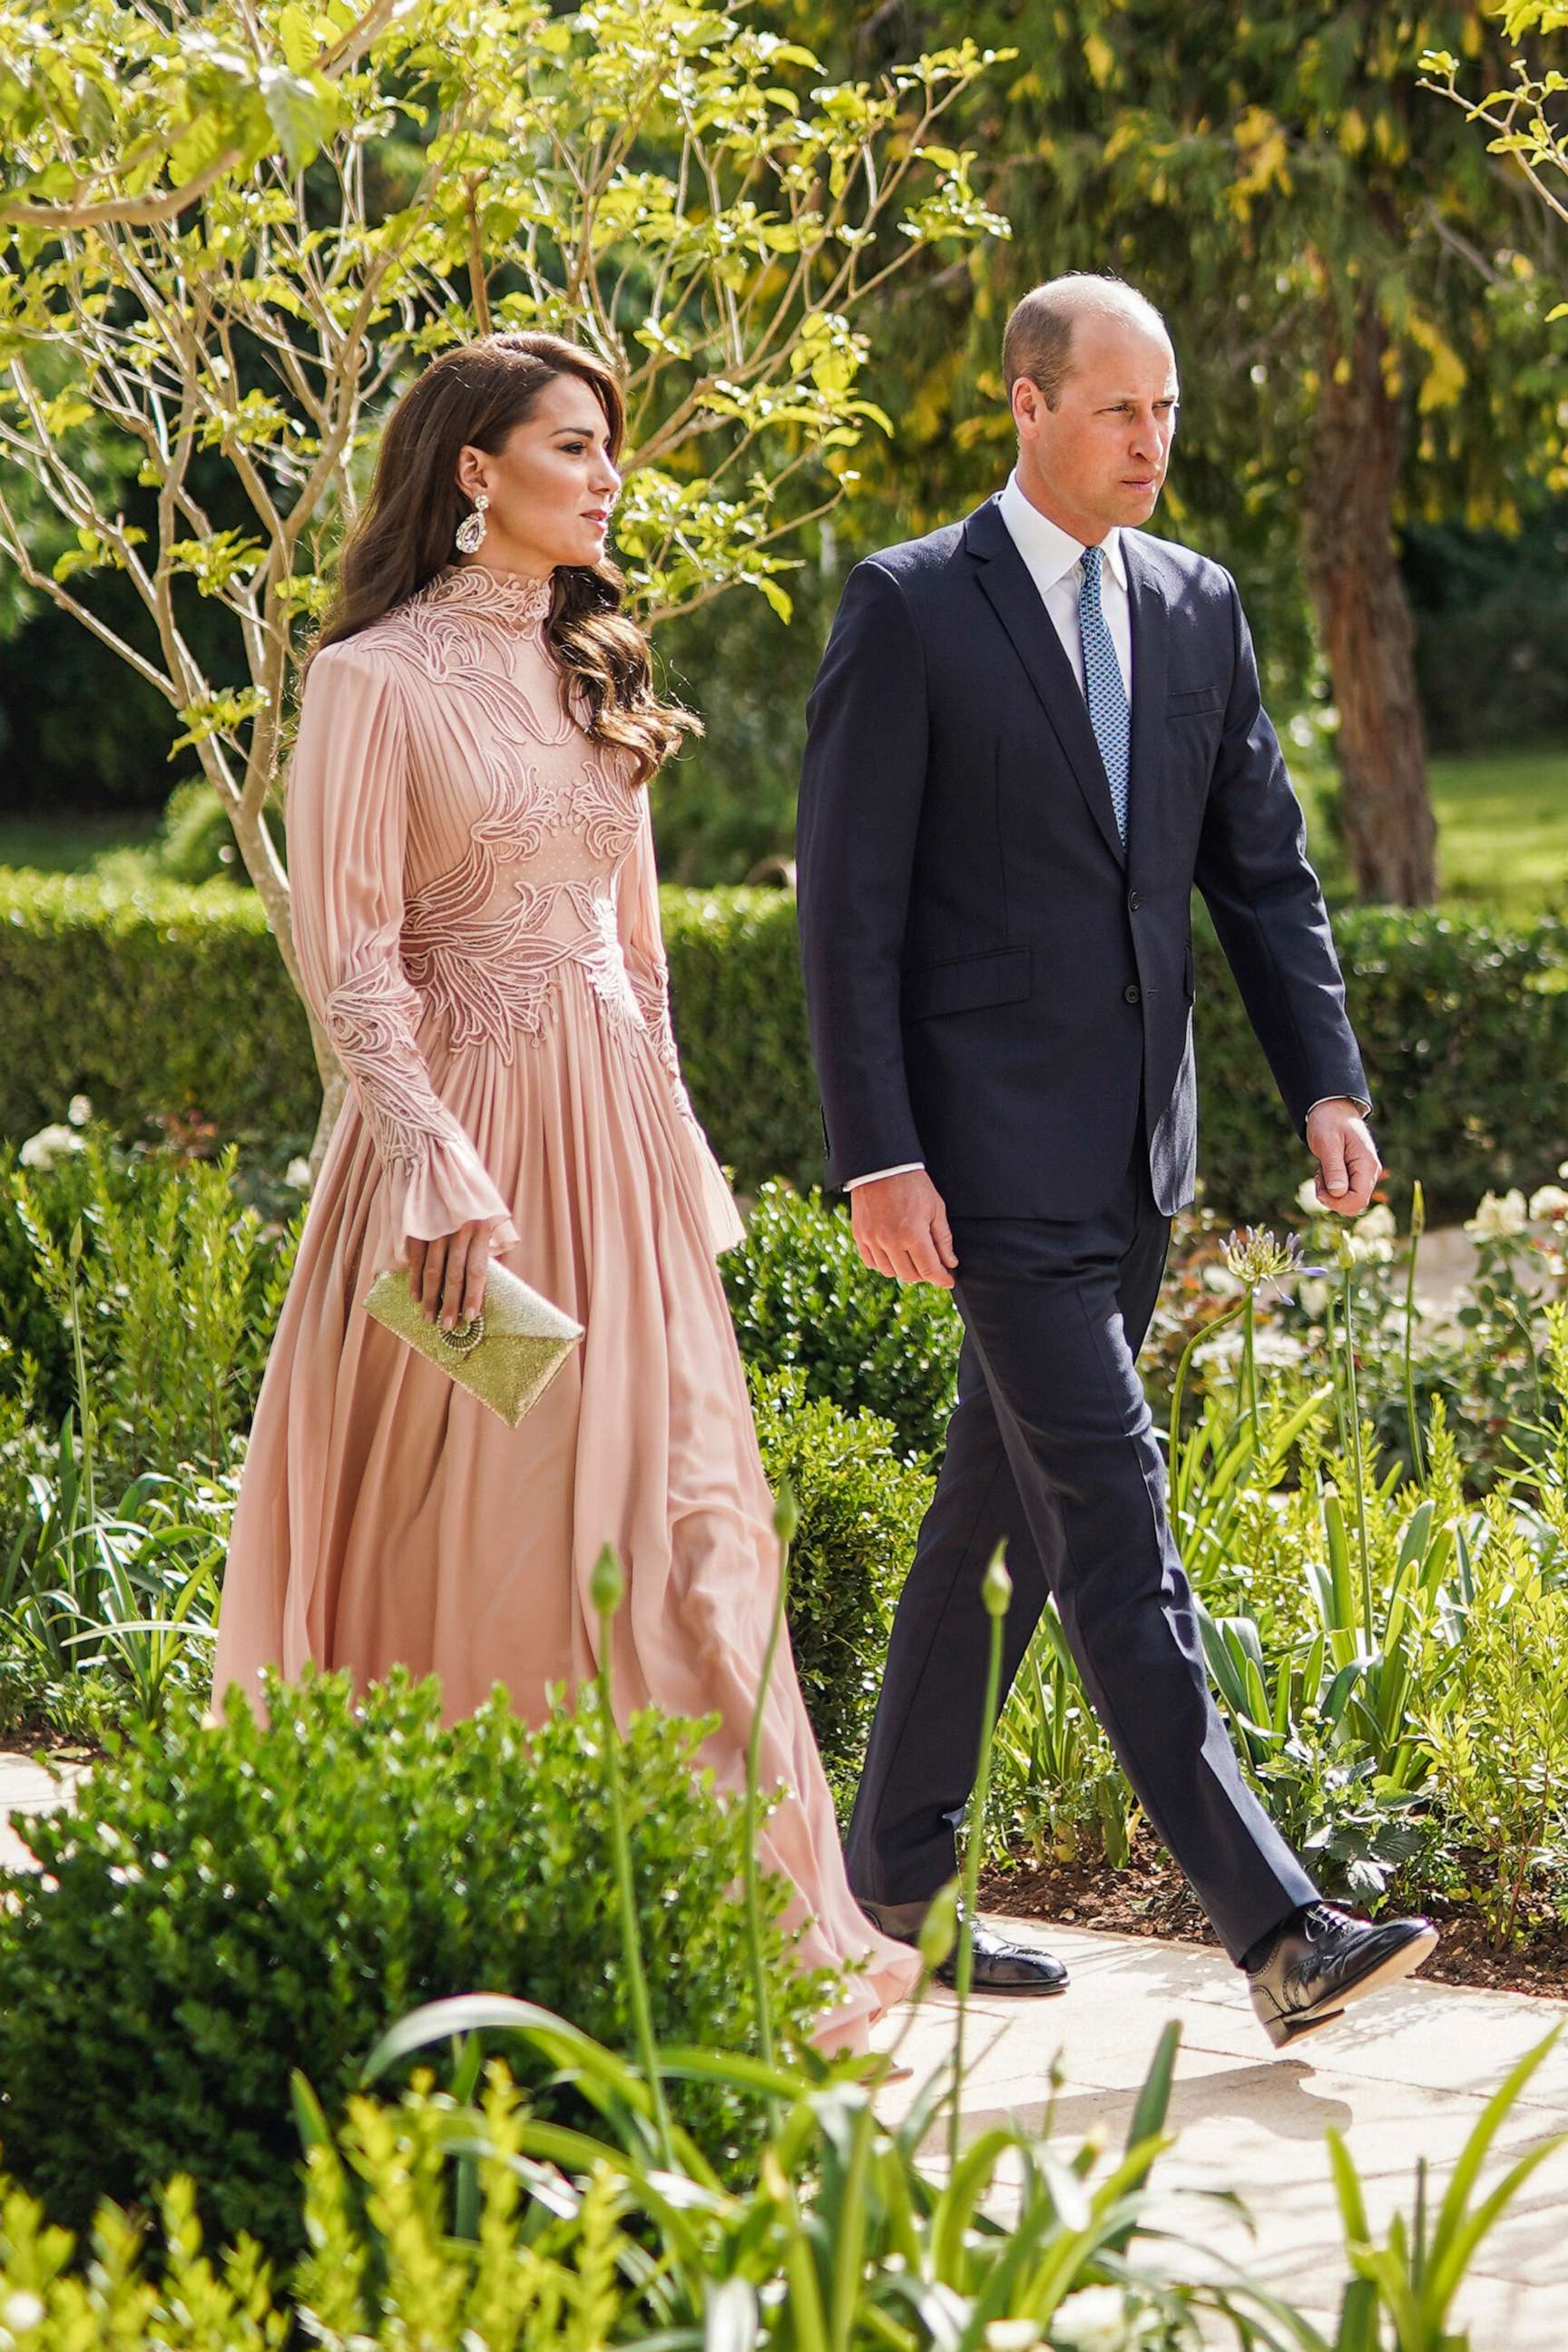 PHOTO: Britain's Prince William and Princess Catherine arrive at the marriage ceremony of Crown Prince Hussein and Saudi architect Rajwa Alseif, June 1, 2023, in Amman, Jordan.